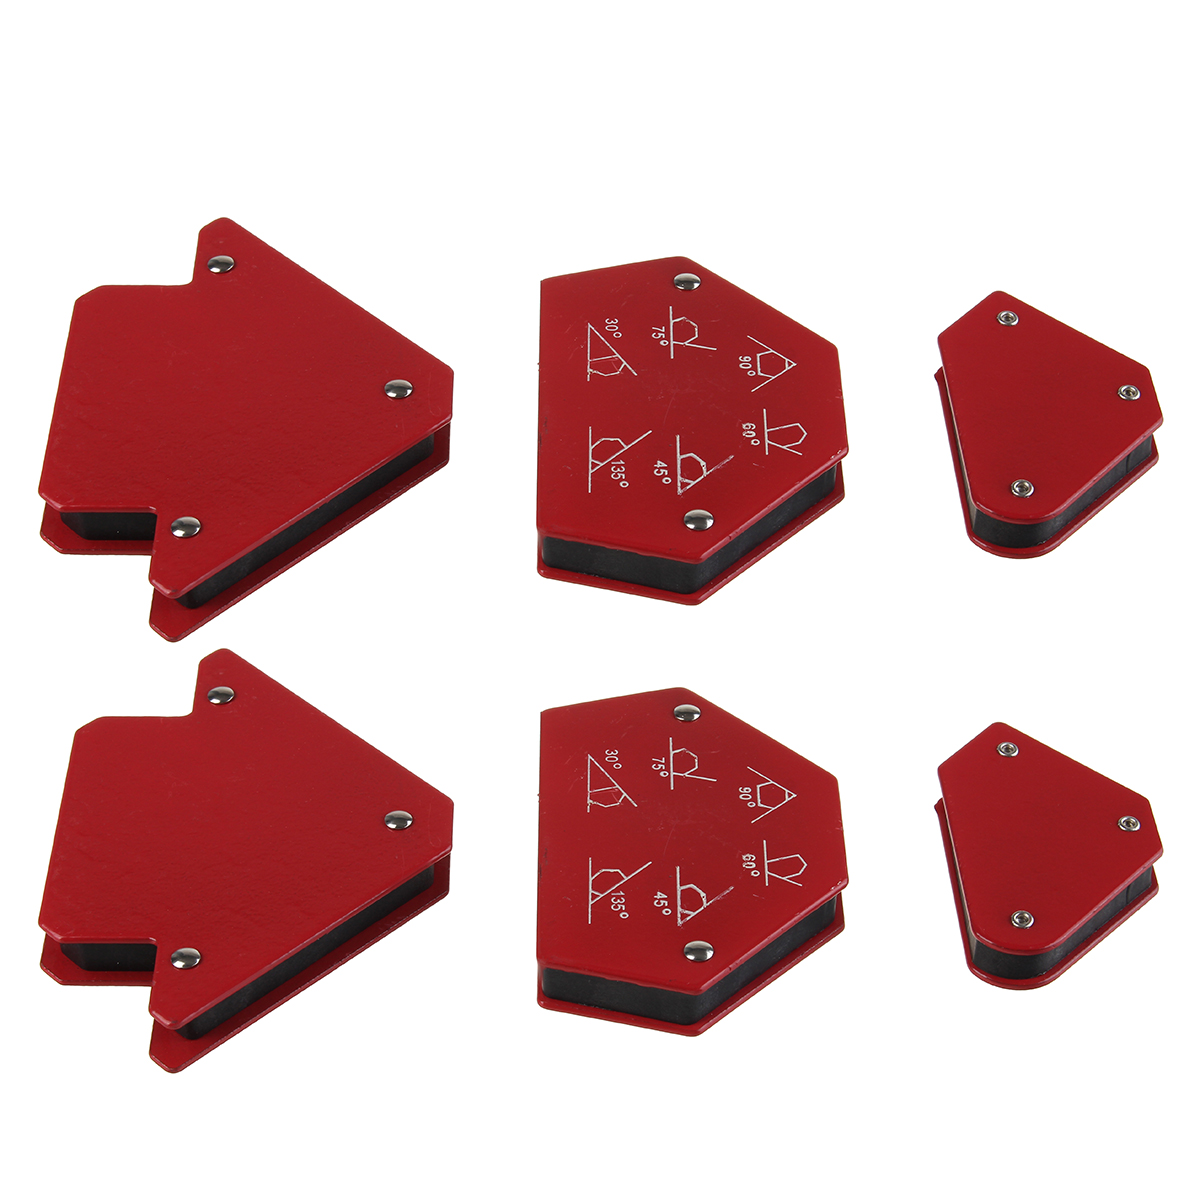 6Pcs-Triangle-Welding-Positioner-Magnetic-Fixed-Angle-Soldering-Locator-Tools-Without-Switch-Welding-1757937-8